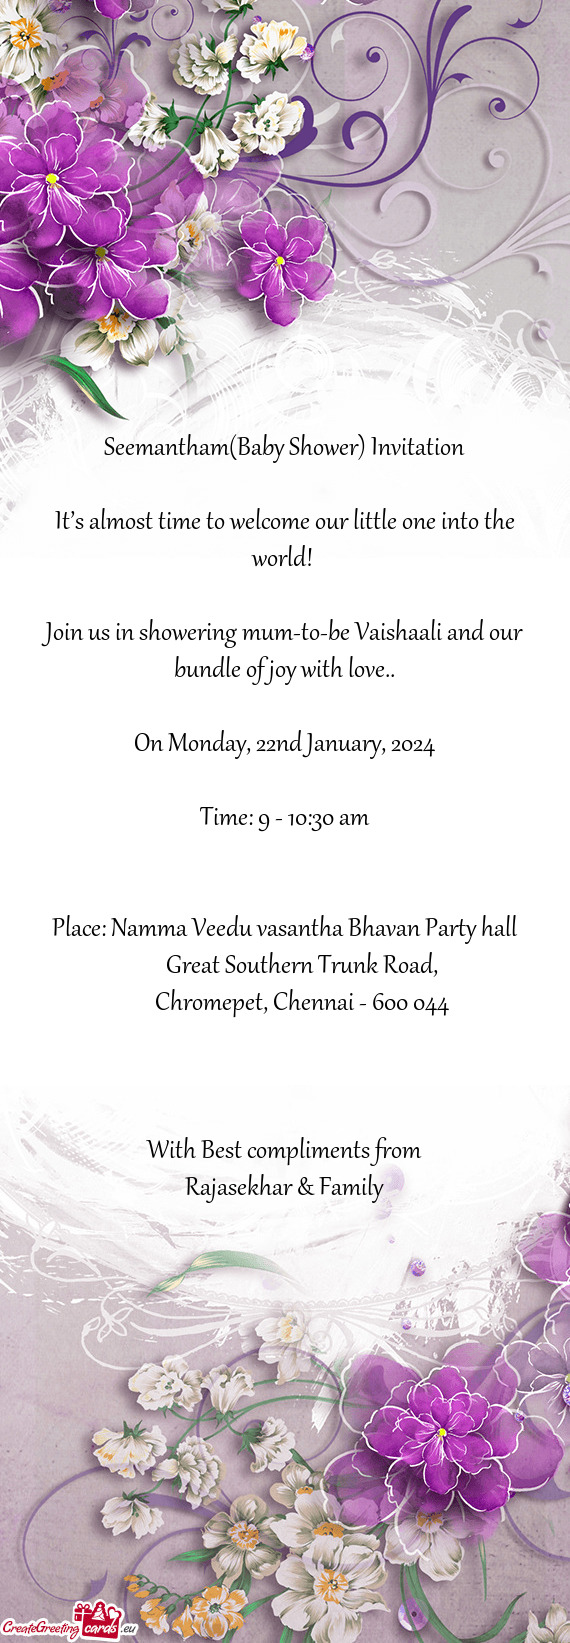 Join us in showering mum-to-be Vaishaali and our bundle of joy with love